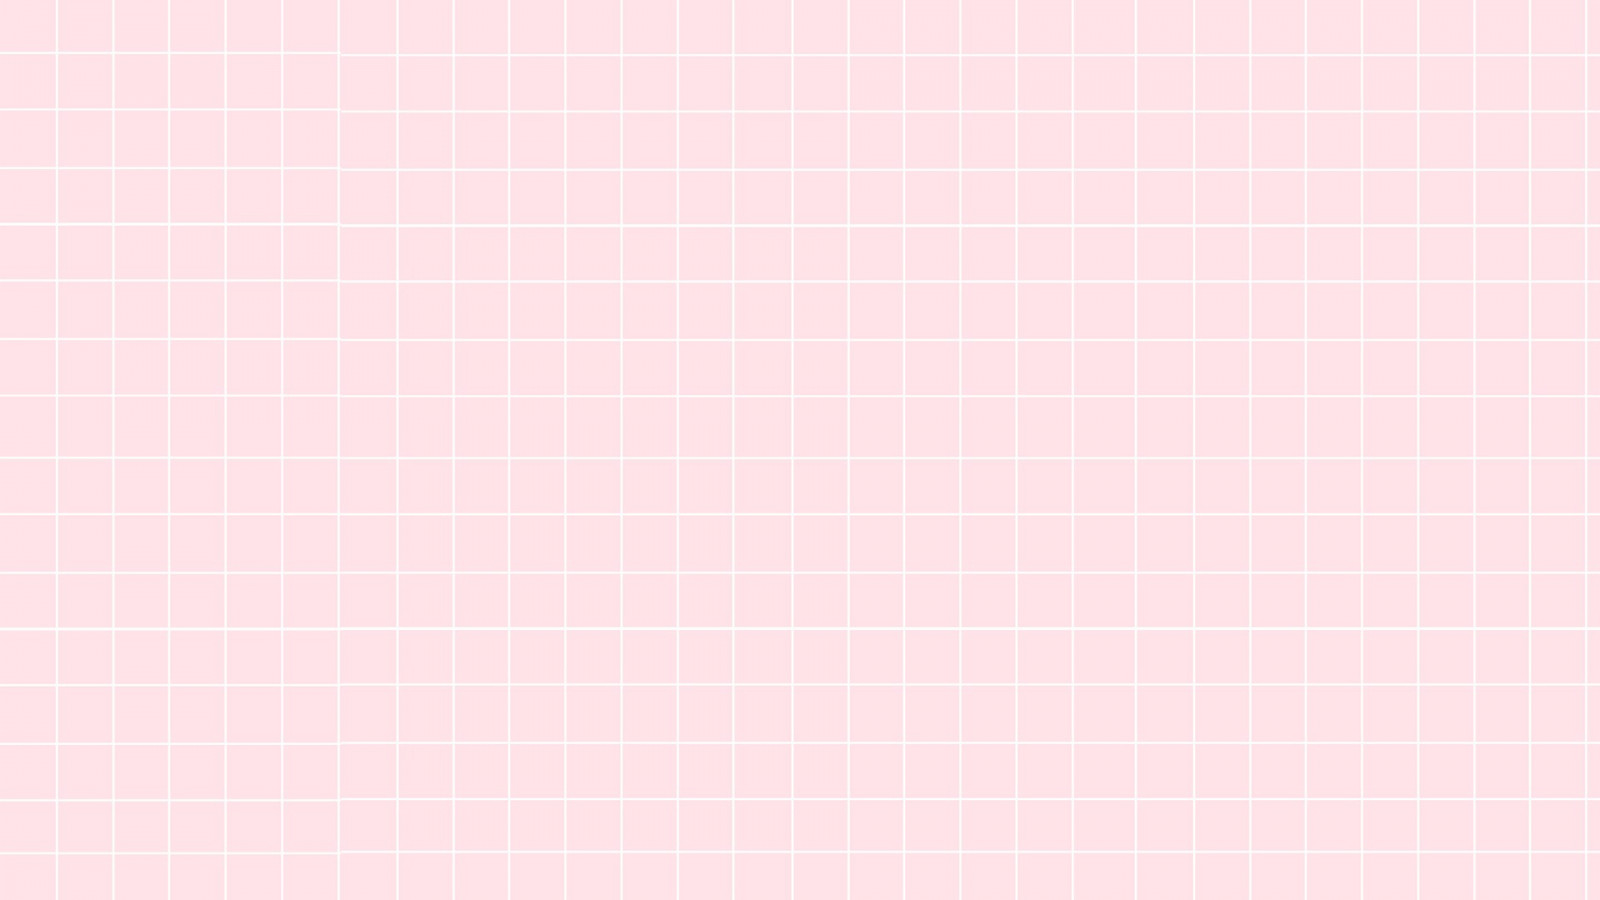 Pink grid background with white grid lines - YouTube